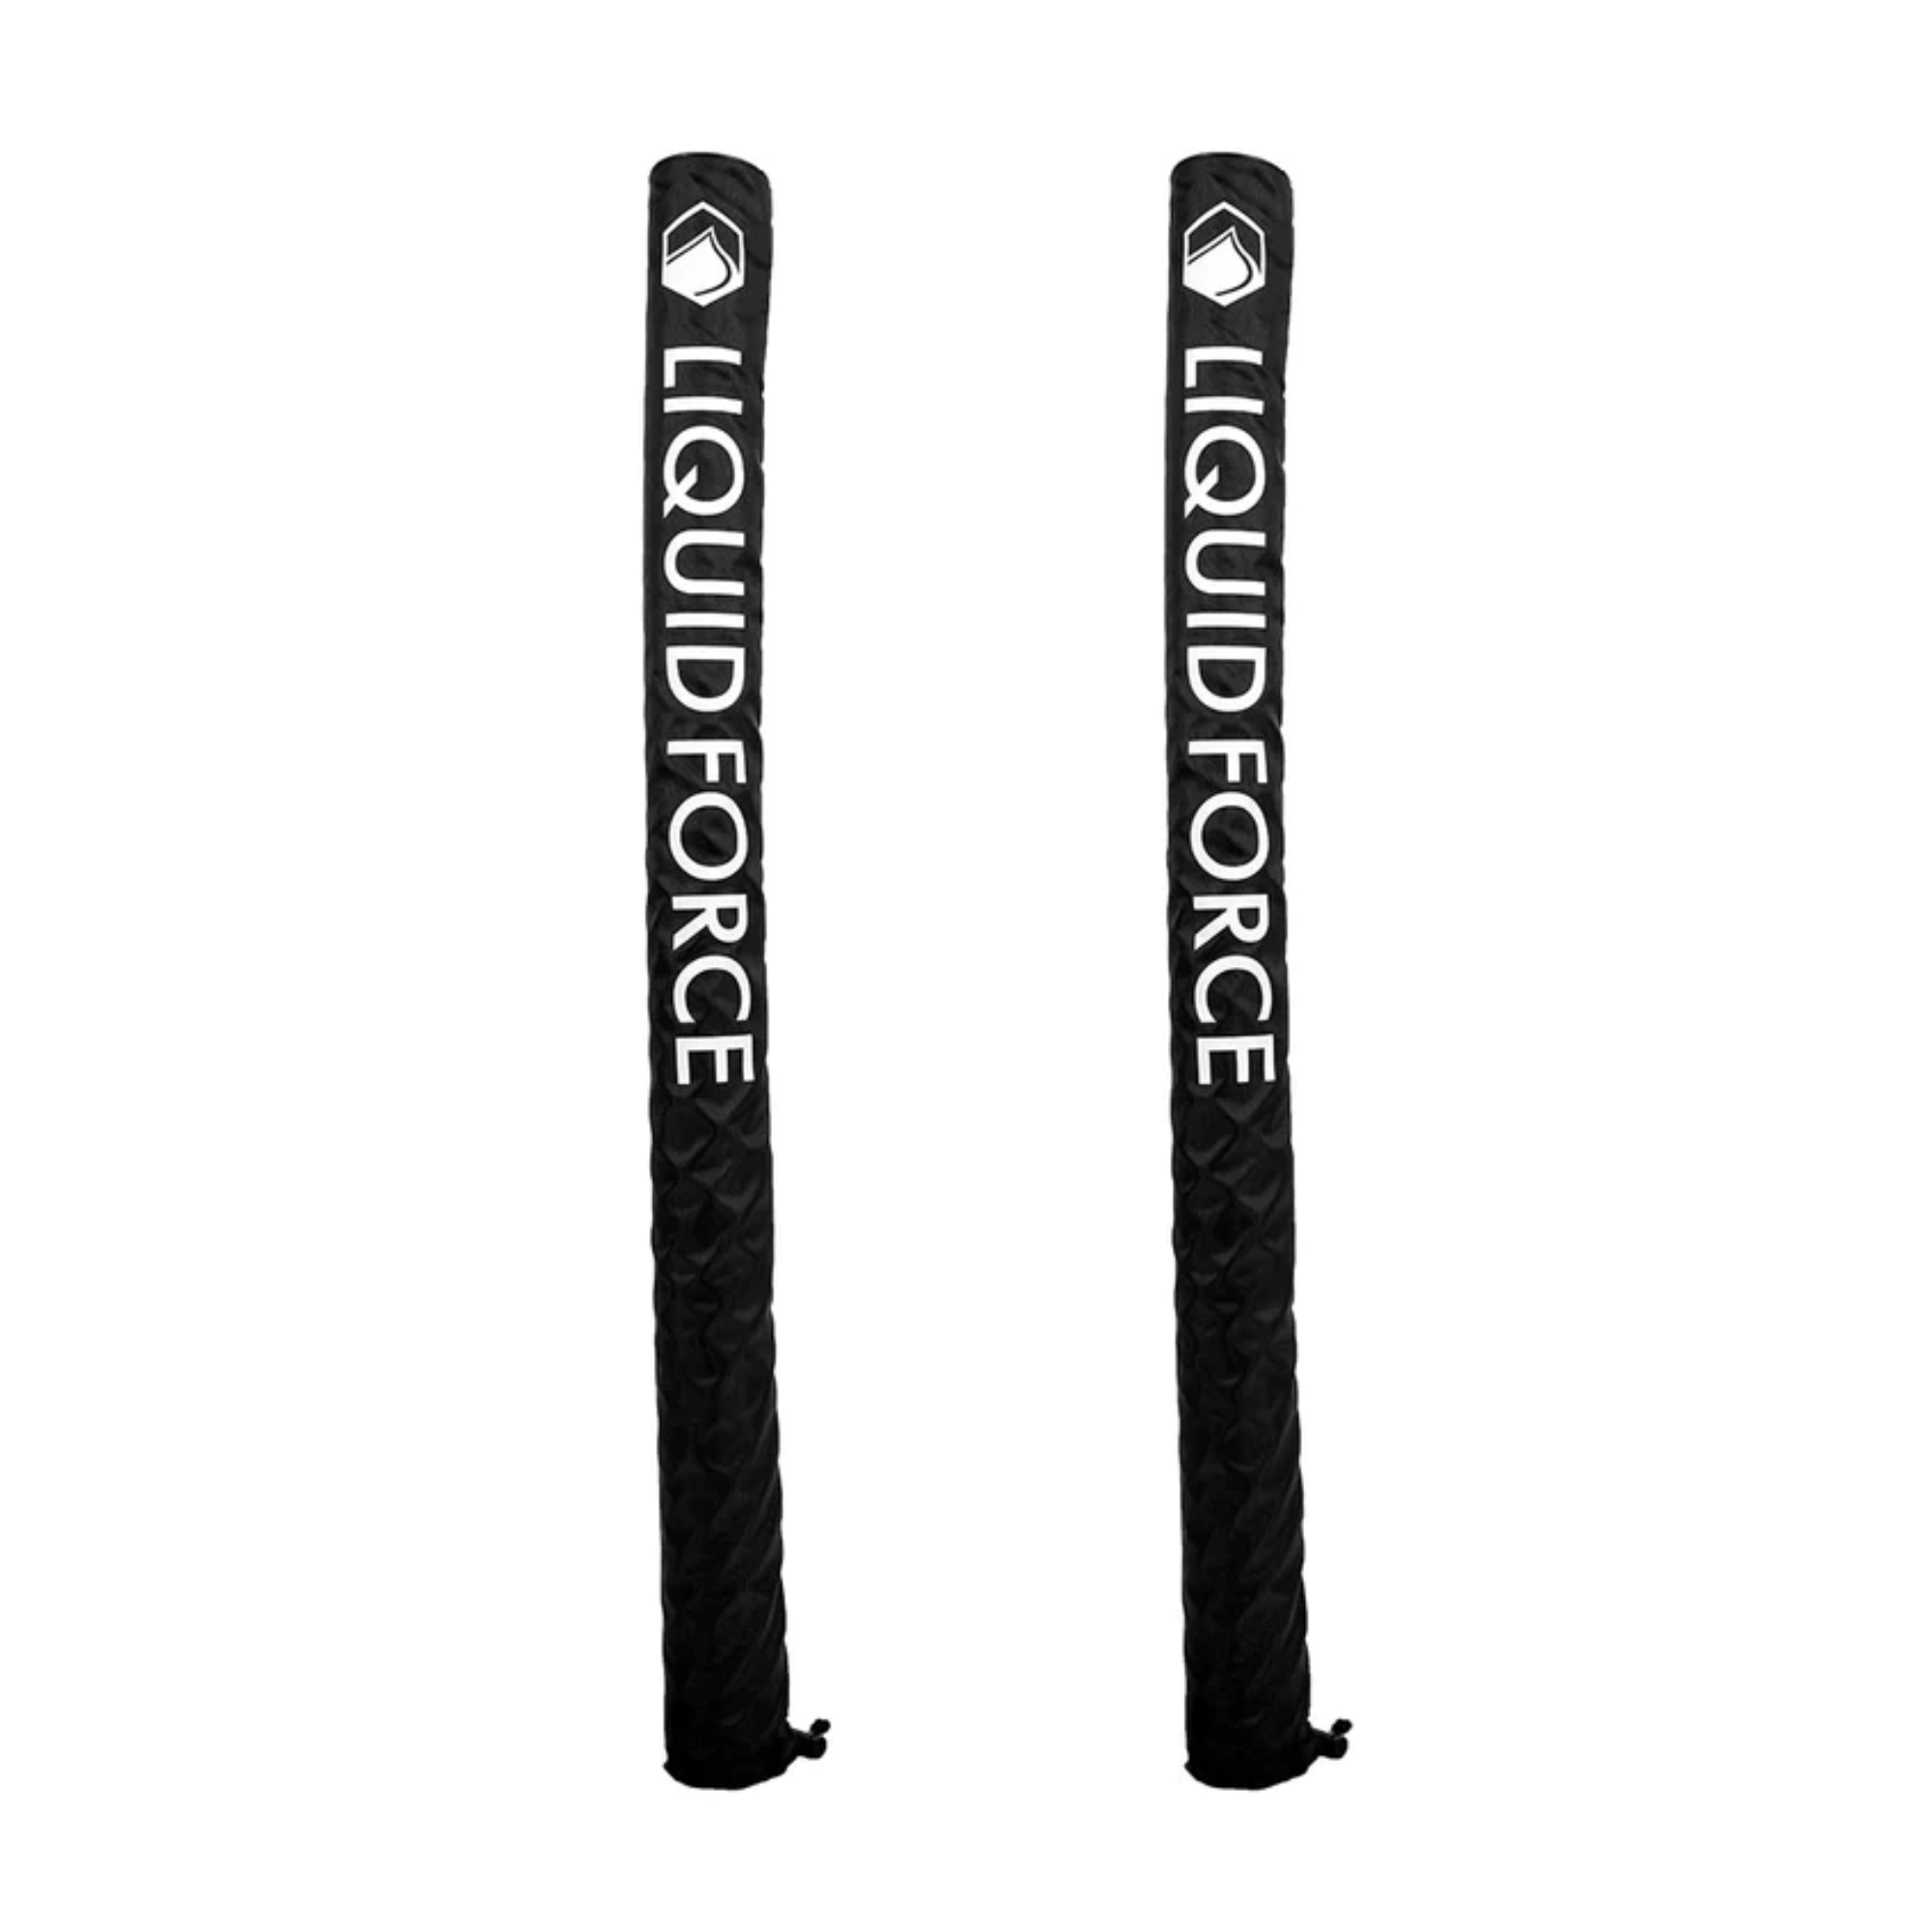 Liquid Force Trailer Guide 4' DLX Padded - Black